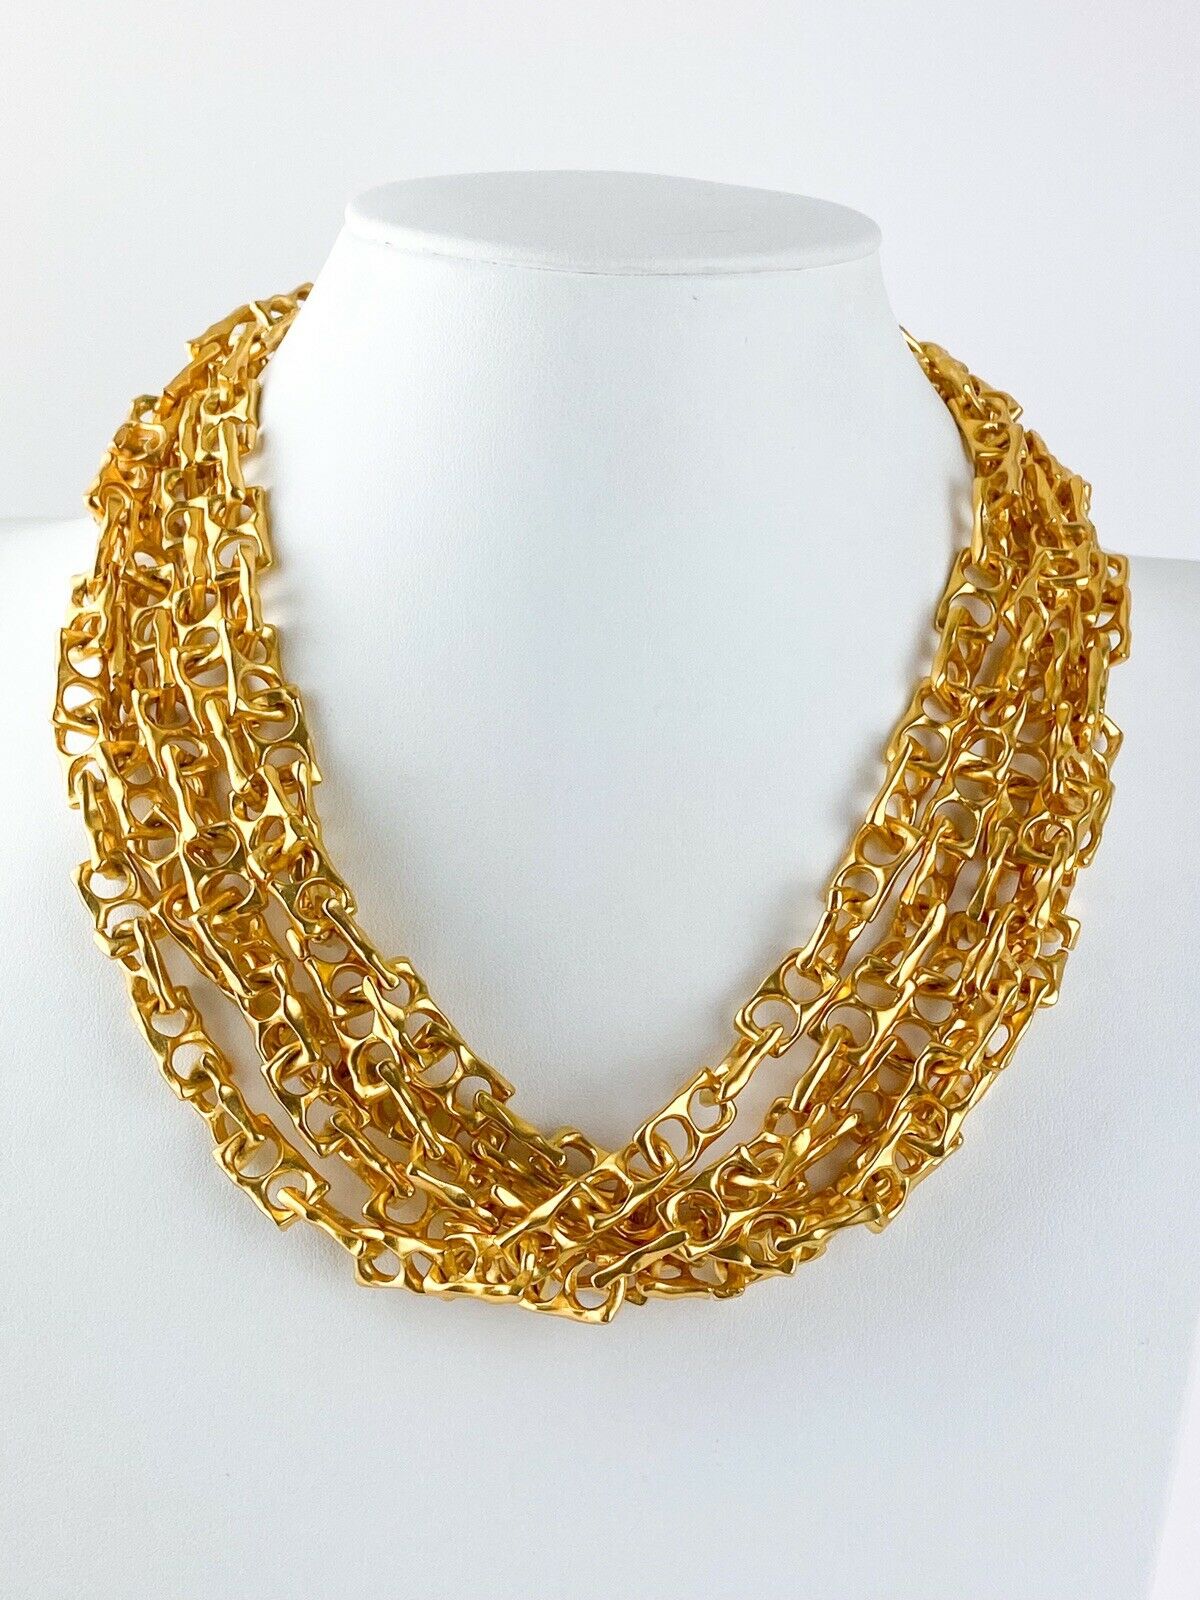 【SOLD OUT】Karl Lagerfeld Vintage Gold Tone Multi-Strands Chain Necklace Collector Piece